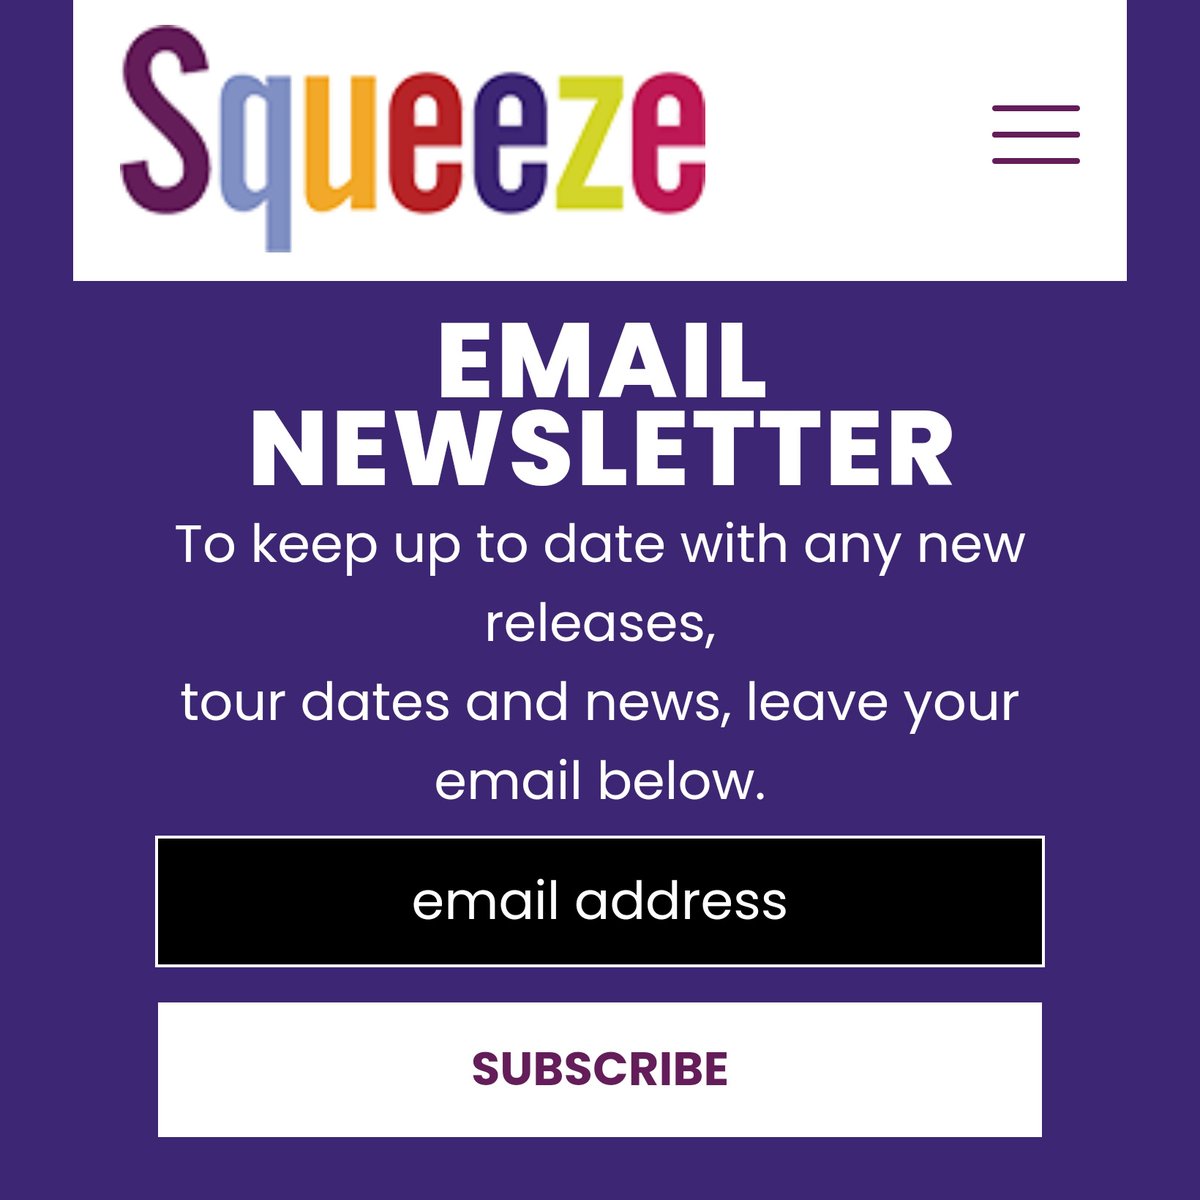 Have you joined the Squeeze official email list? We run it directly, and use it to update with big announcements like tour dates, new merchandise, ticket pre-sales and other release details. If you haven't now's a great time to sign up. 😉 eepurl.com/h7ENWX